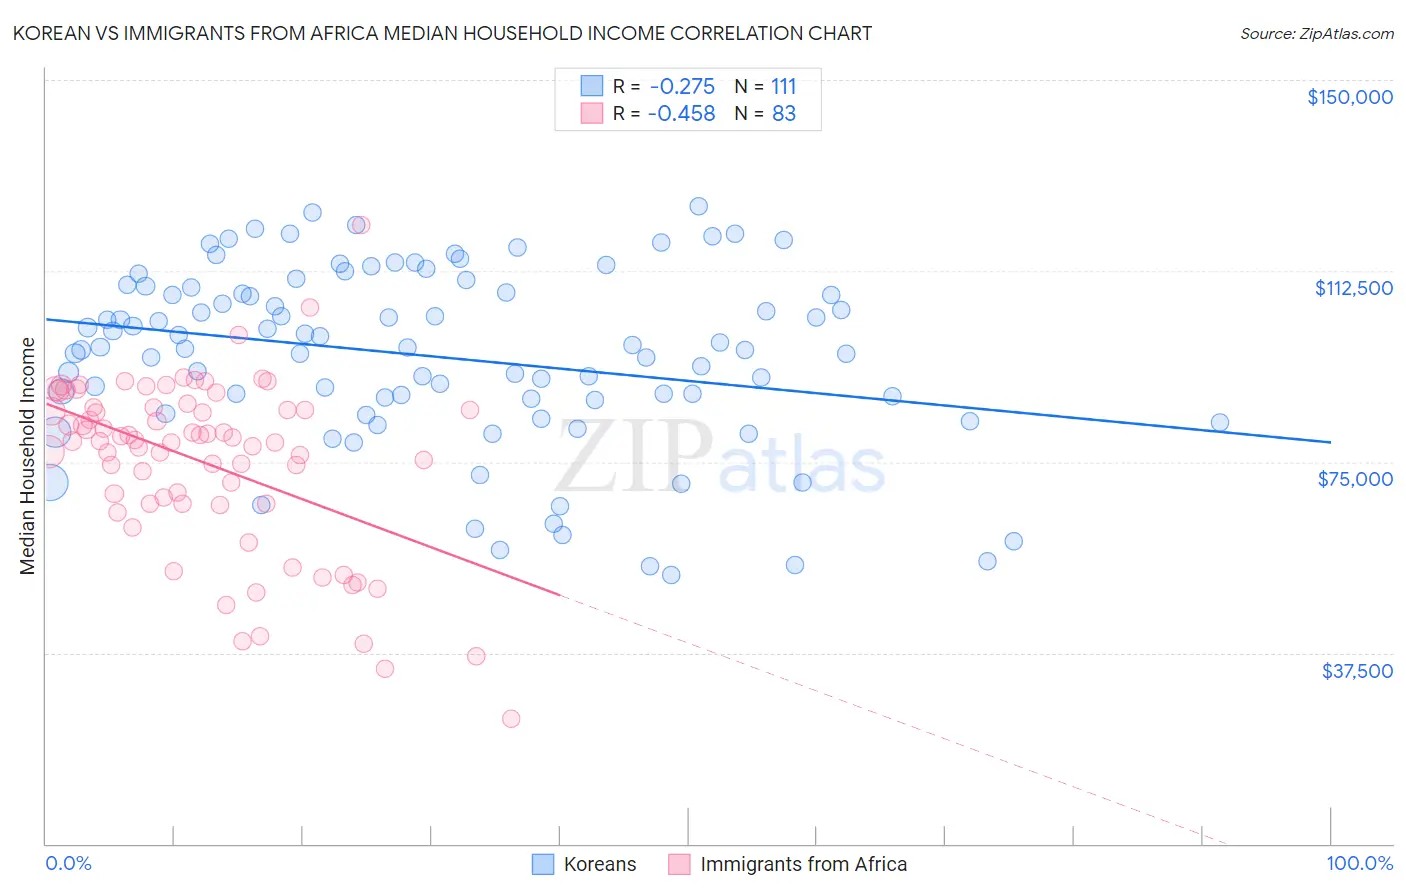 Korean vs Immigrants from Africa Median Household Income